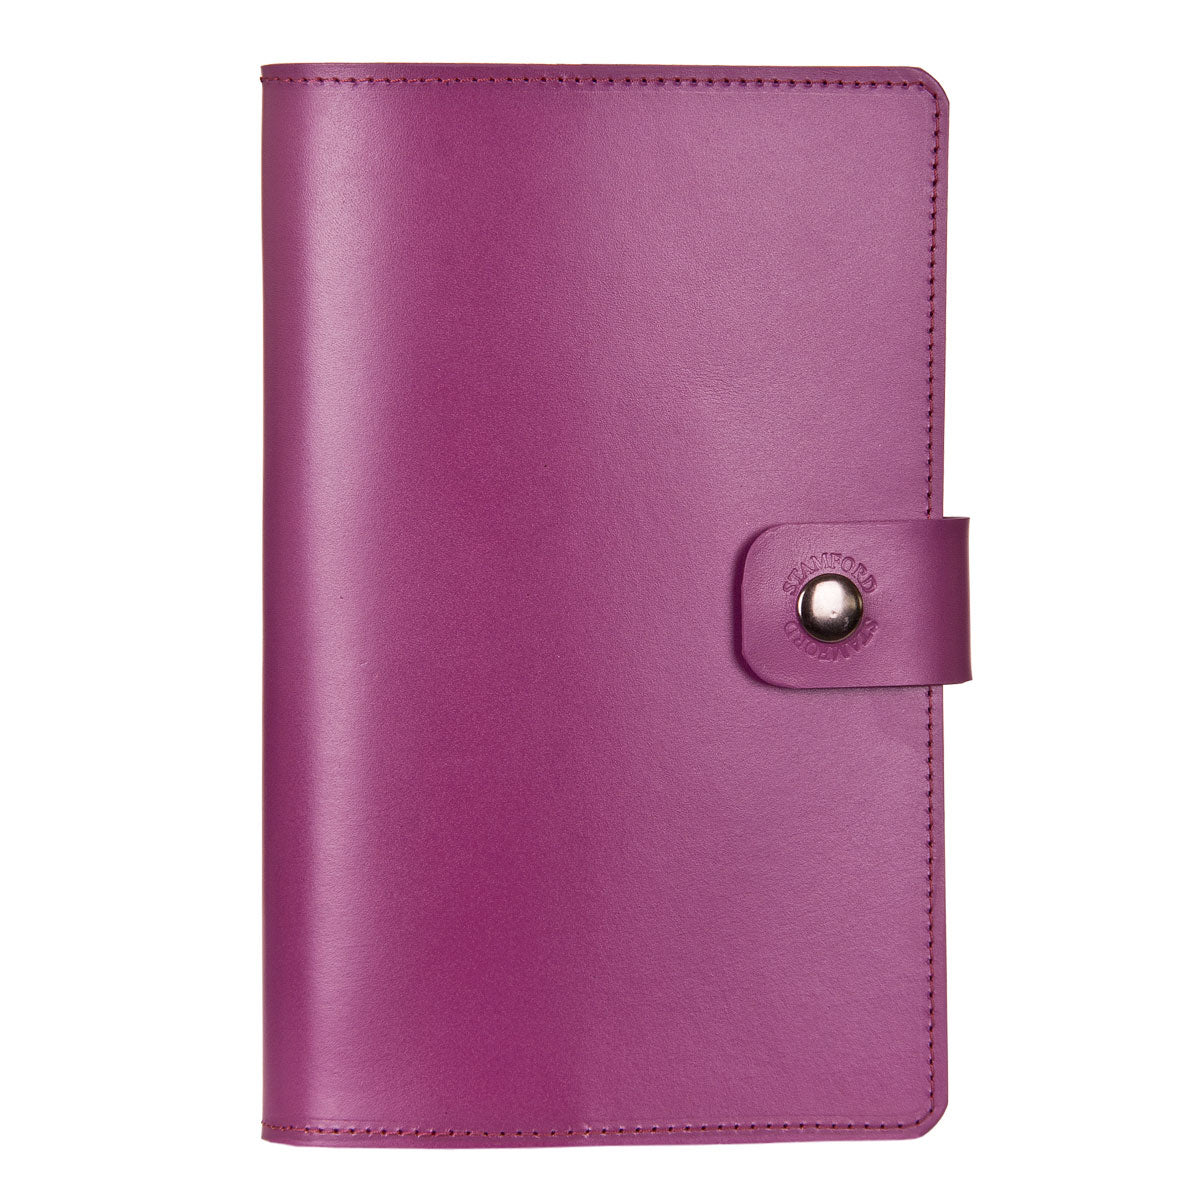 Purple Burghley leather refillable journal